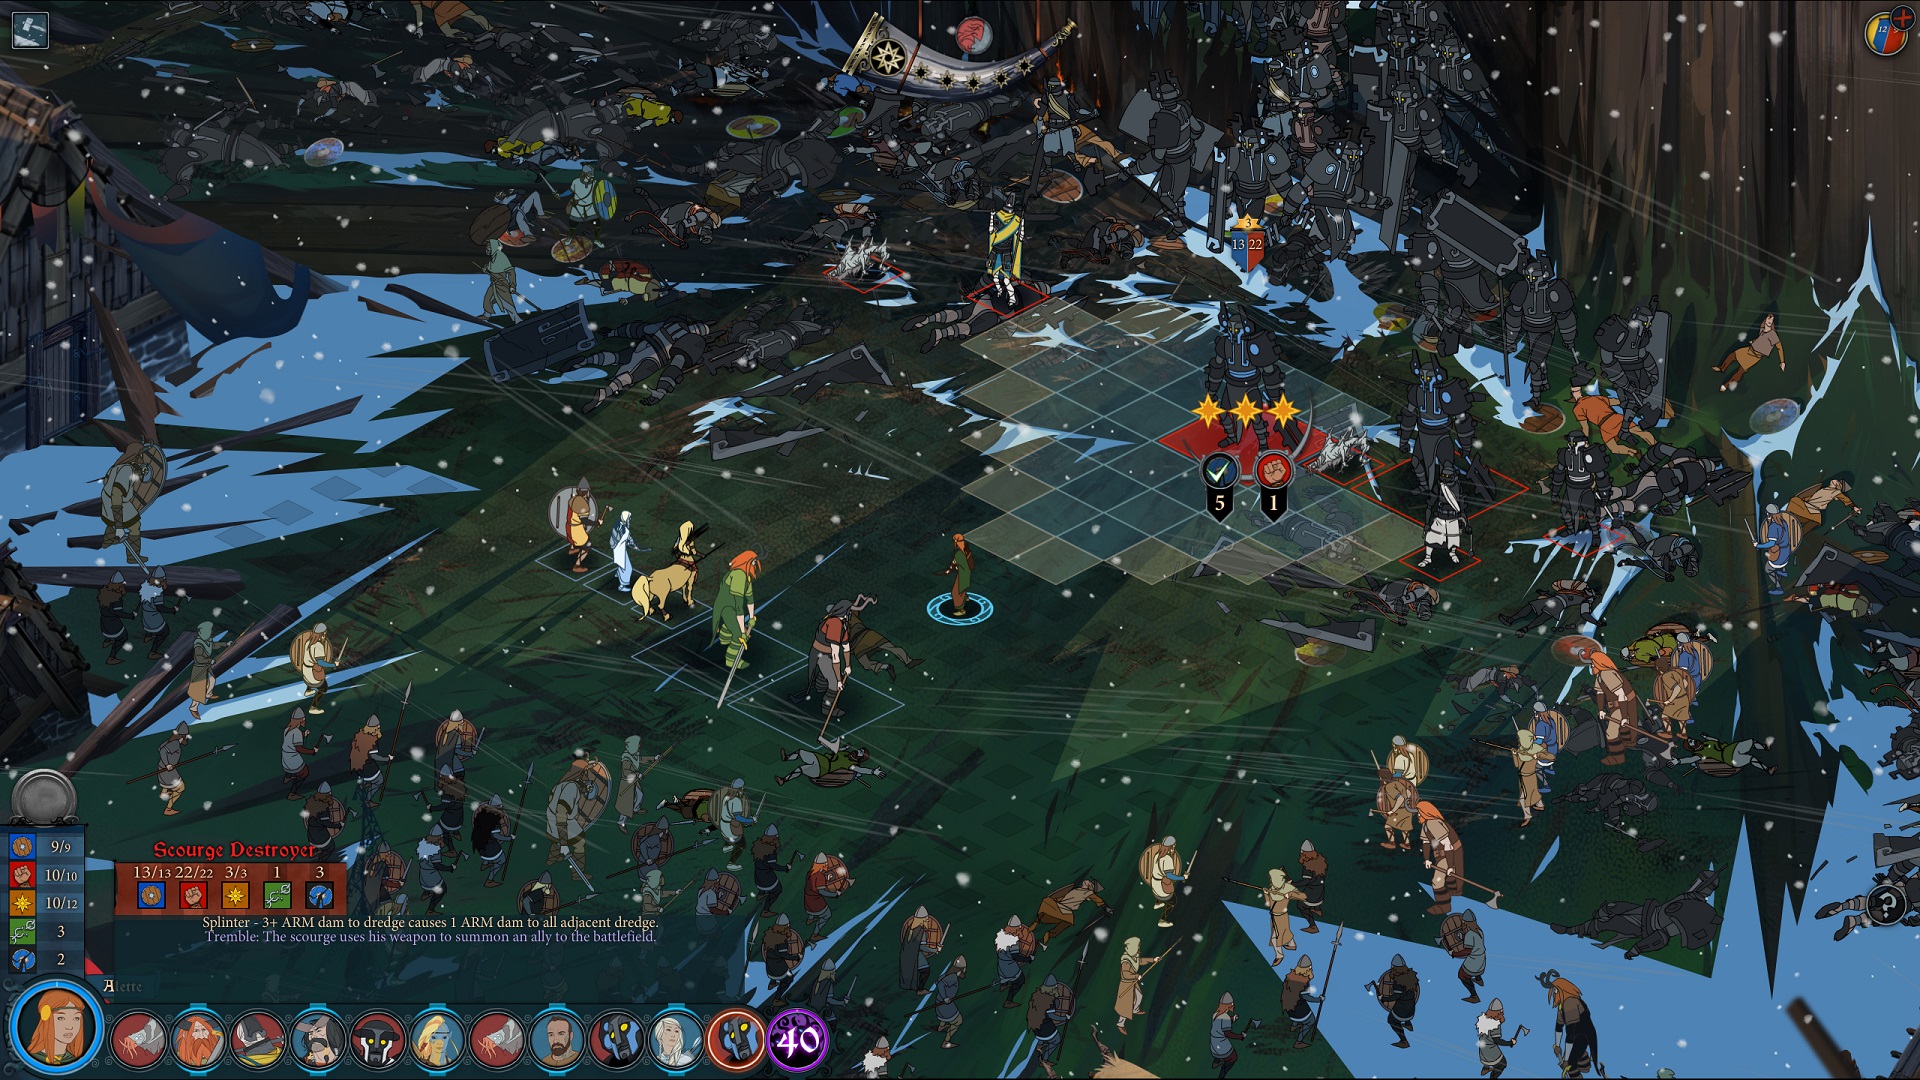 Best turn-based RPG: Banner Saga 3. Image shows two groups of warriors face off against each other on a field with a grid imposed on top.